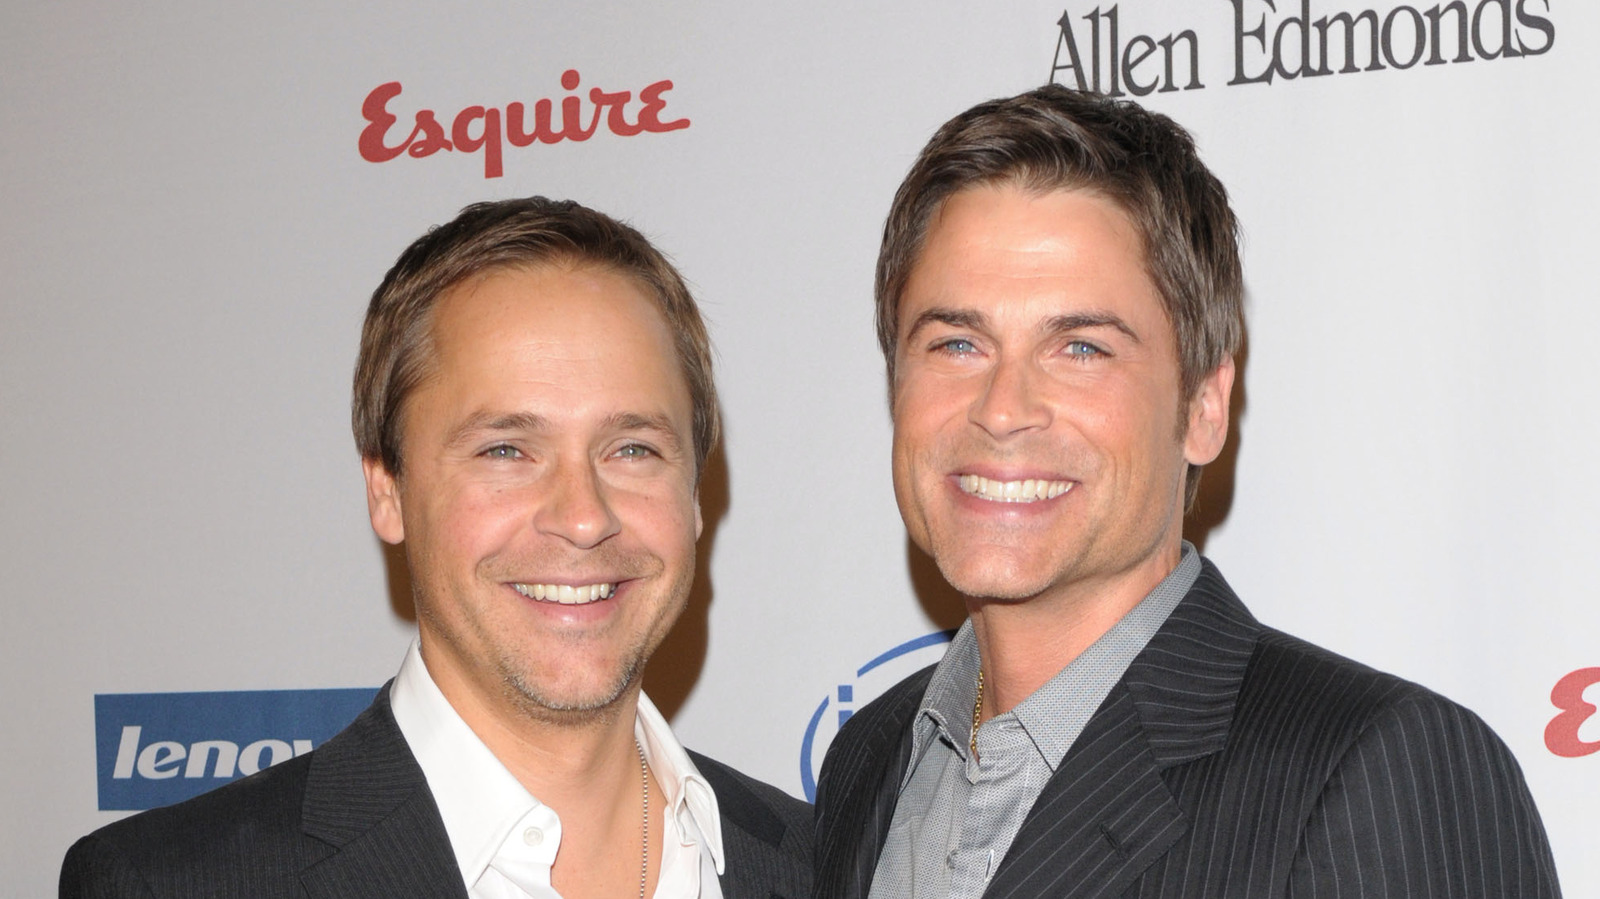 What We Know About Brothers Rob And Chad Lowe's RealLife Relationship